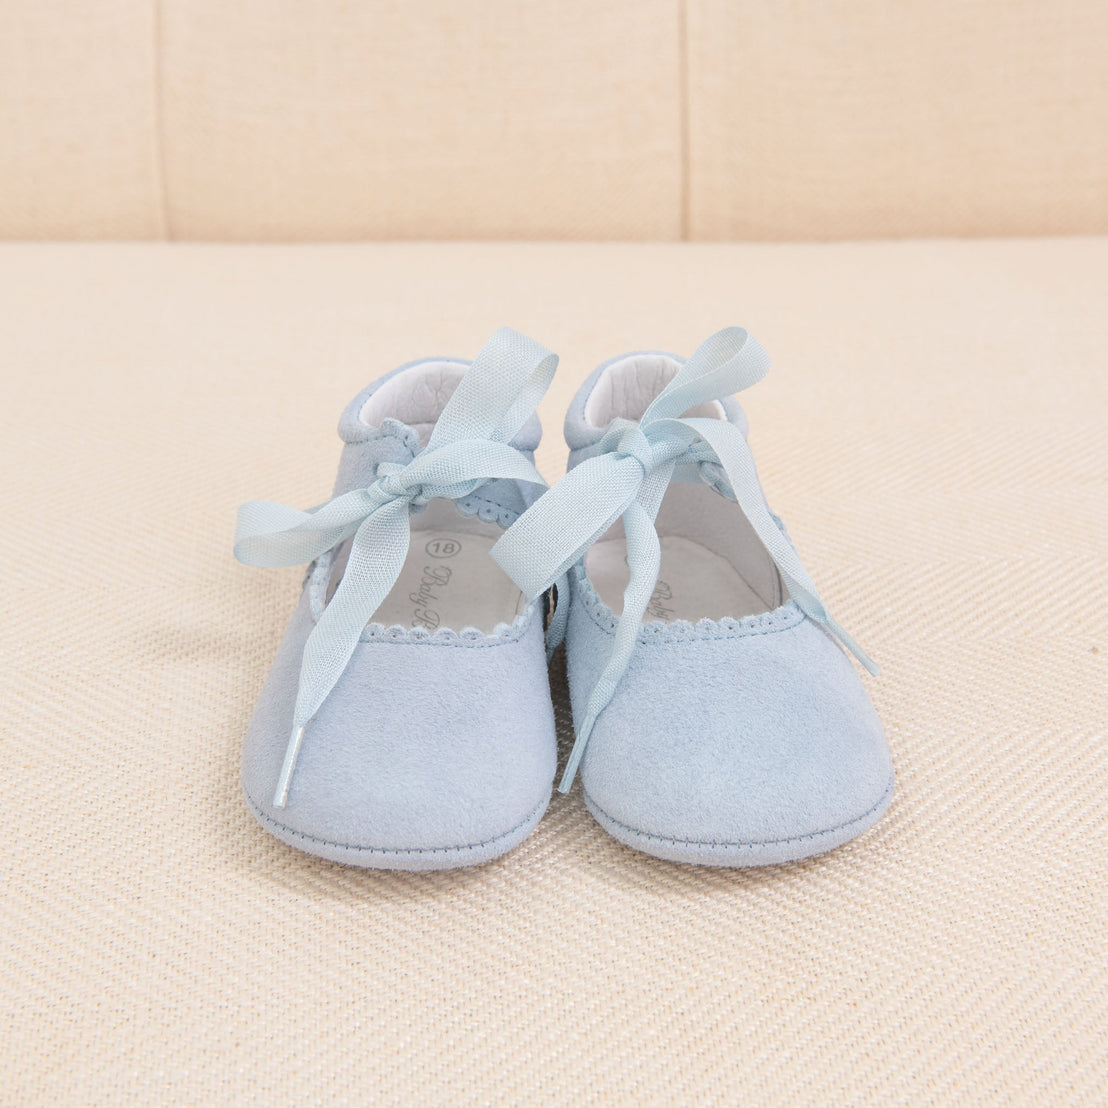 A pair of baby's Thea Suede Tie Mary Janes in light blue with ribbon ties on a beige textile background, suitable for an infant's first birthday dress or Easter celebration. These heirloom-quality shoes feature delicate stitching and soft fabric.